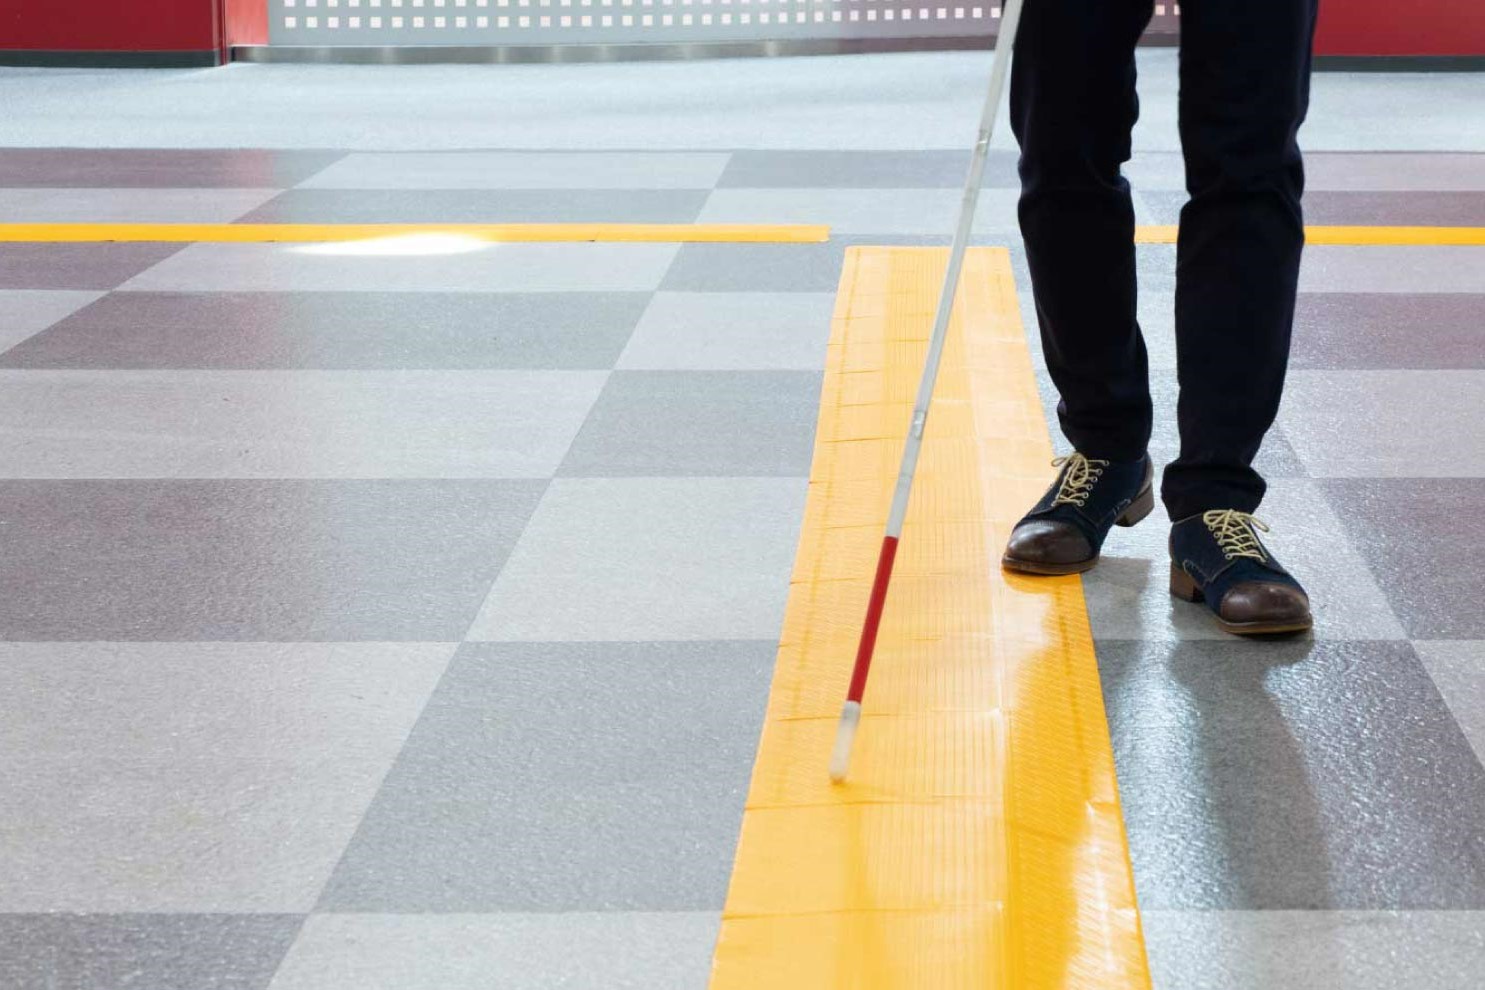 A stretch of the Hodokun guideway rubber mats in yellow shown on the floor. A man is shown stepping on the edge of the mats and using his white cane to feel around while he navigates his way.